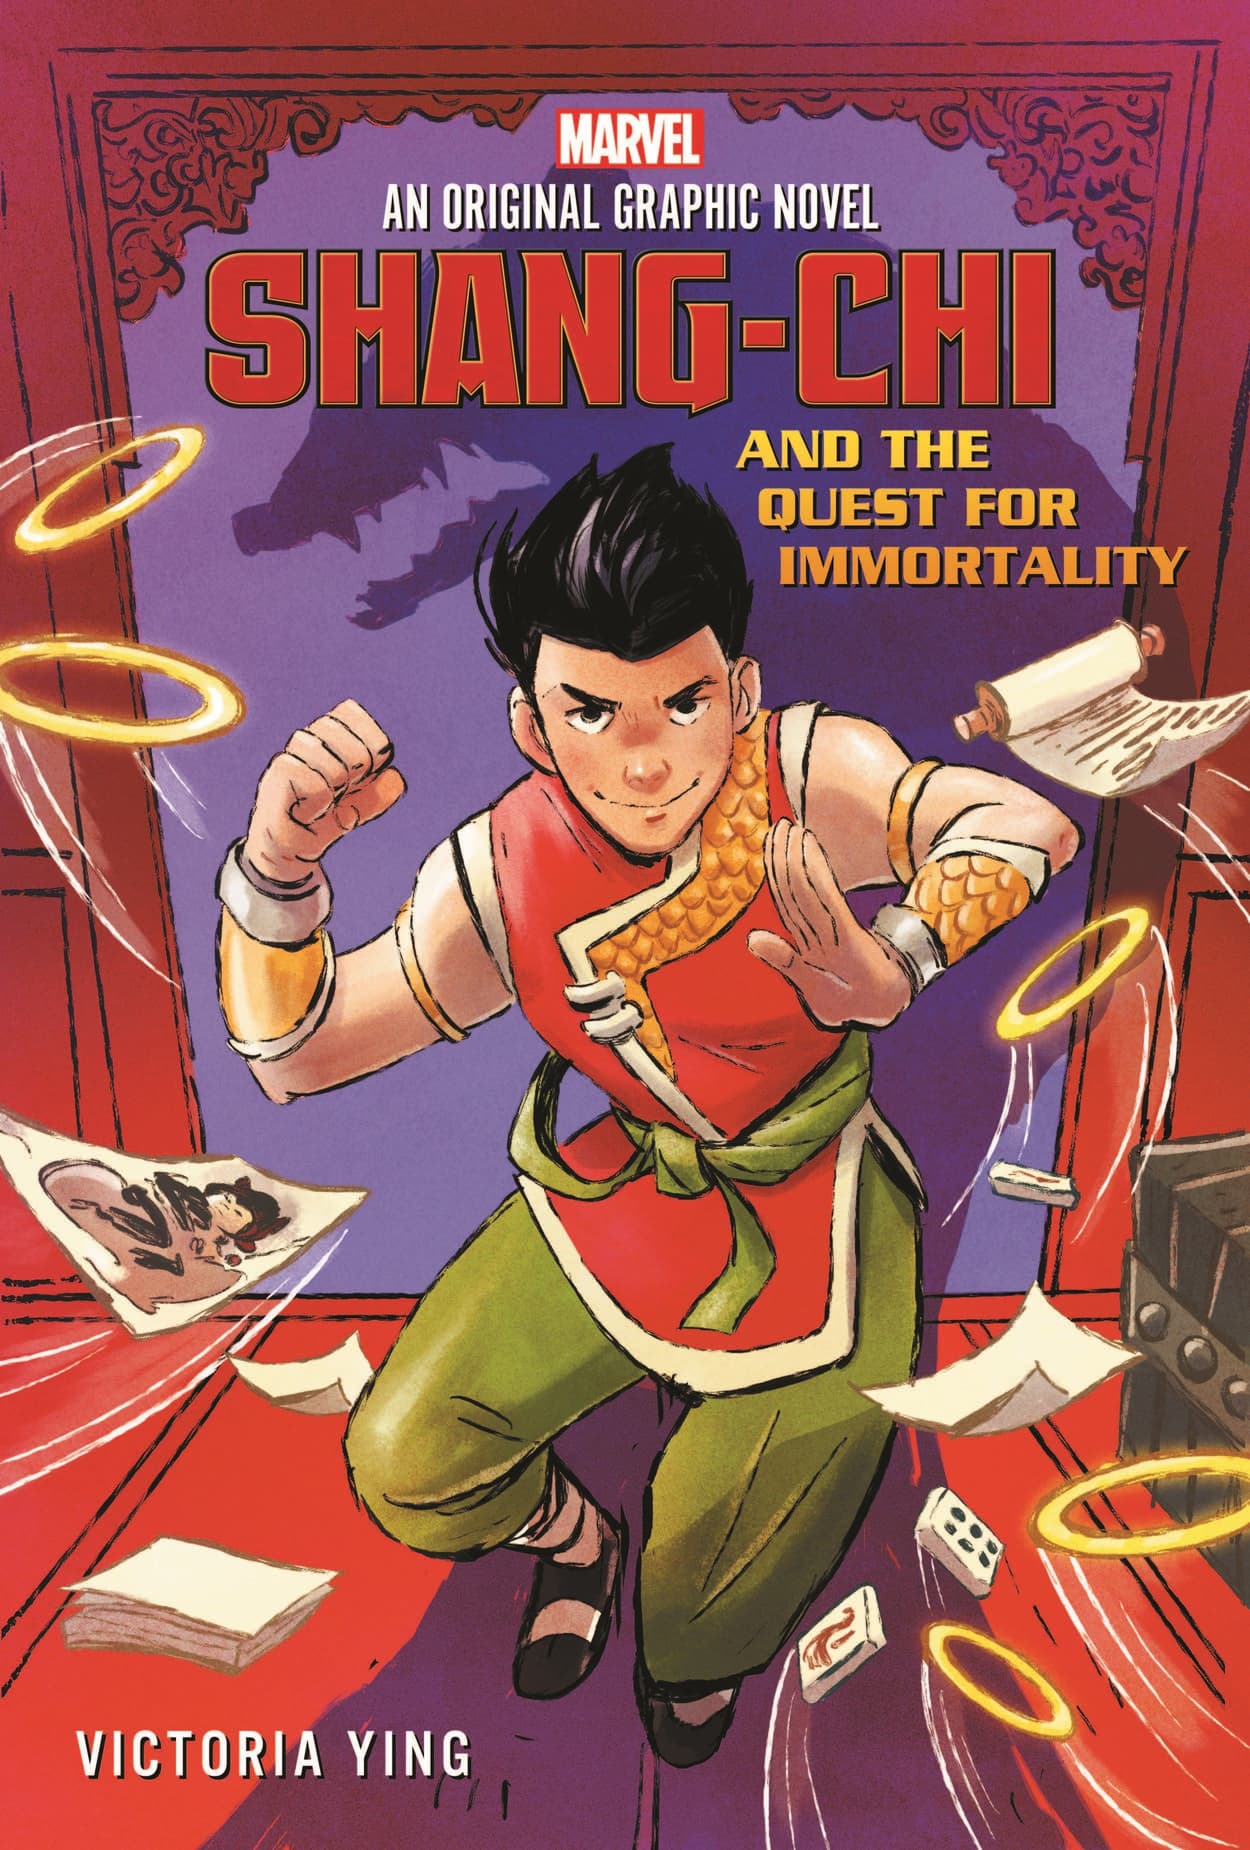 'Shang-Chi and the Quest for Immortality' cover by Victoria Ying